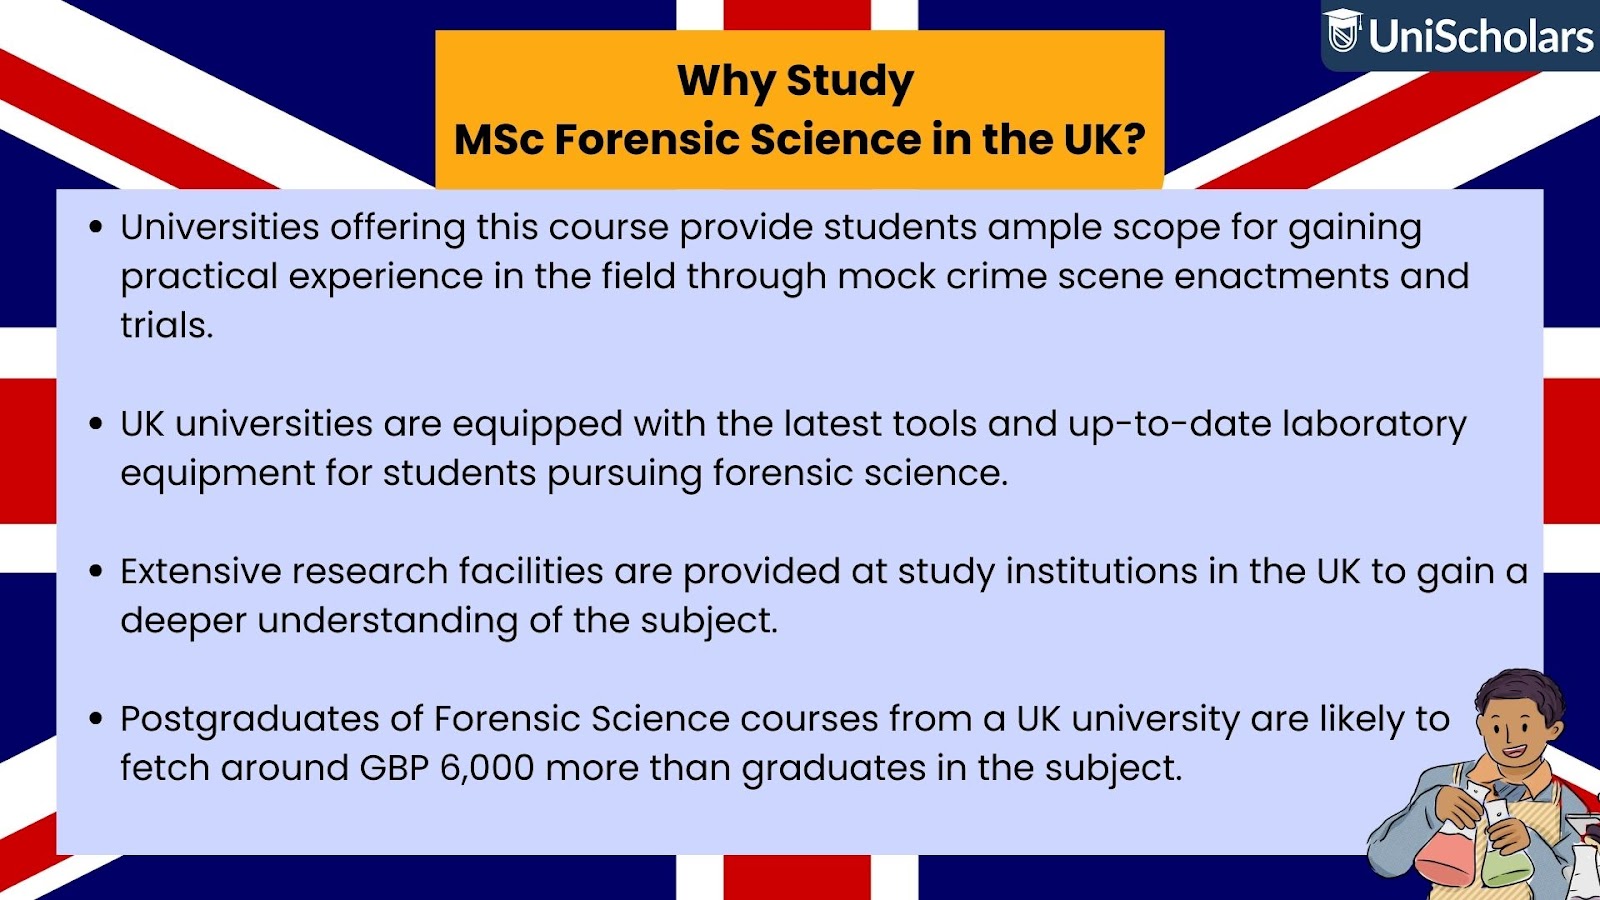 Why Study MSc Forensic Science in the UK